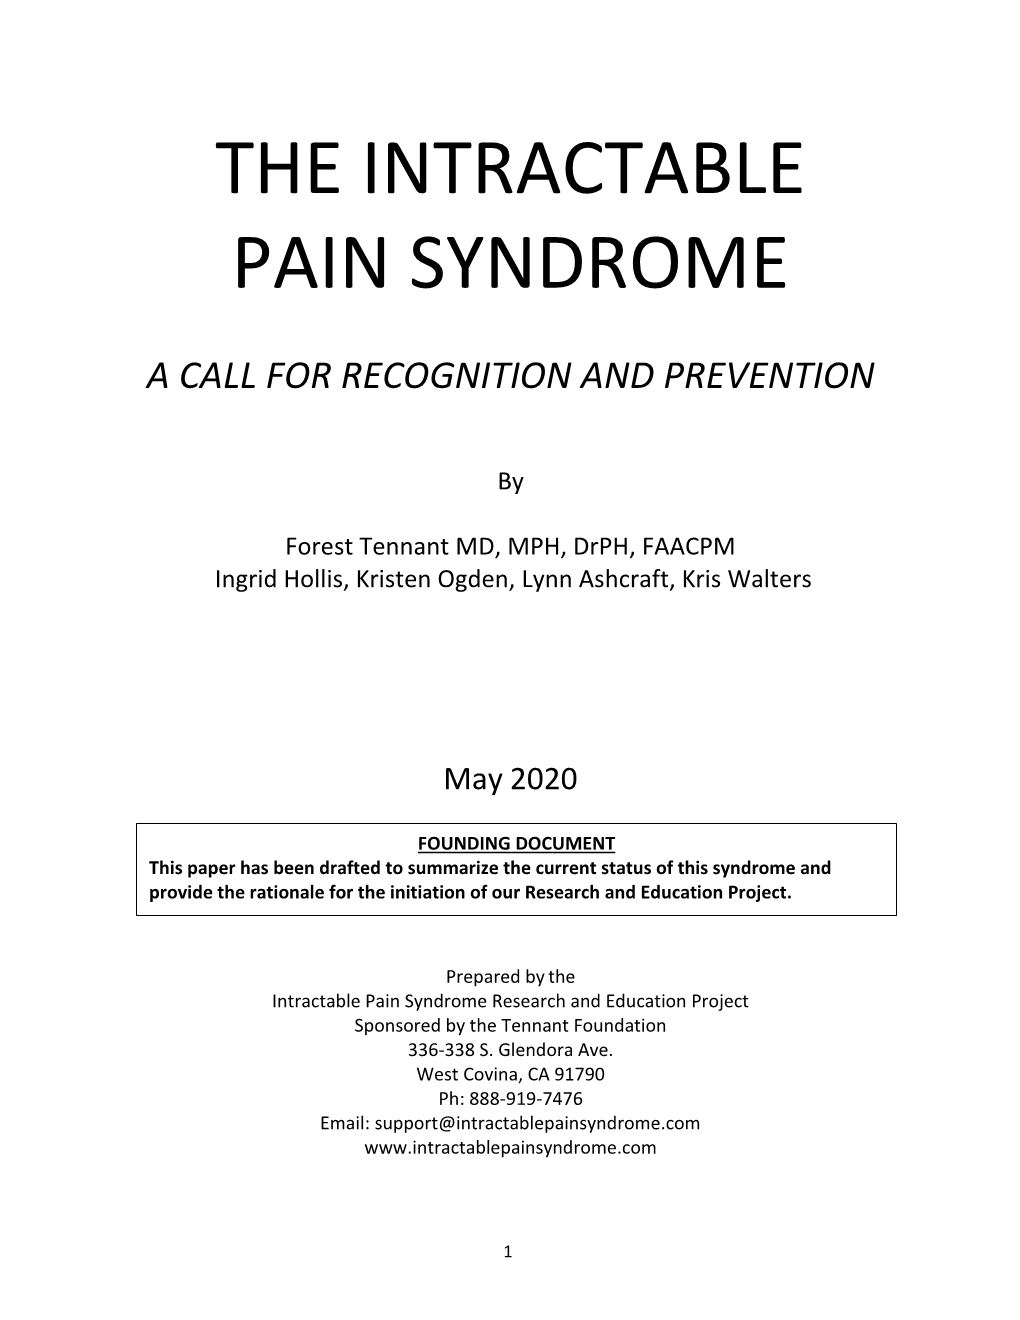 The Intractable Pain Syndrome